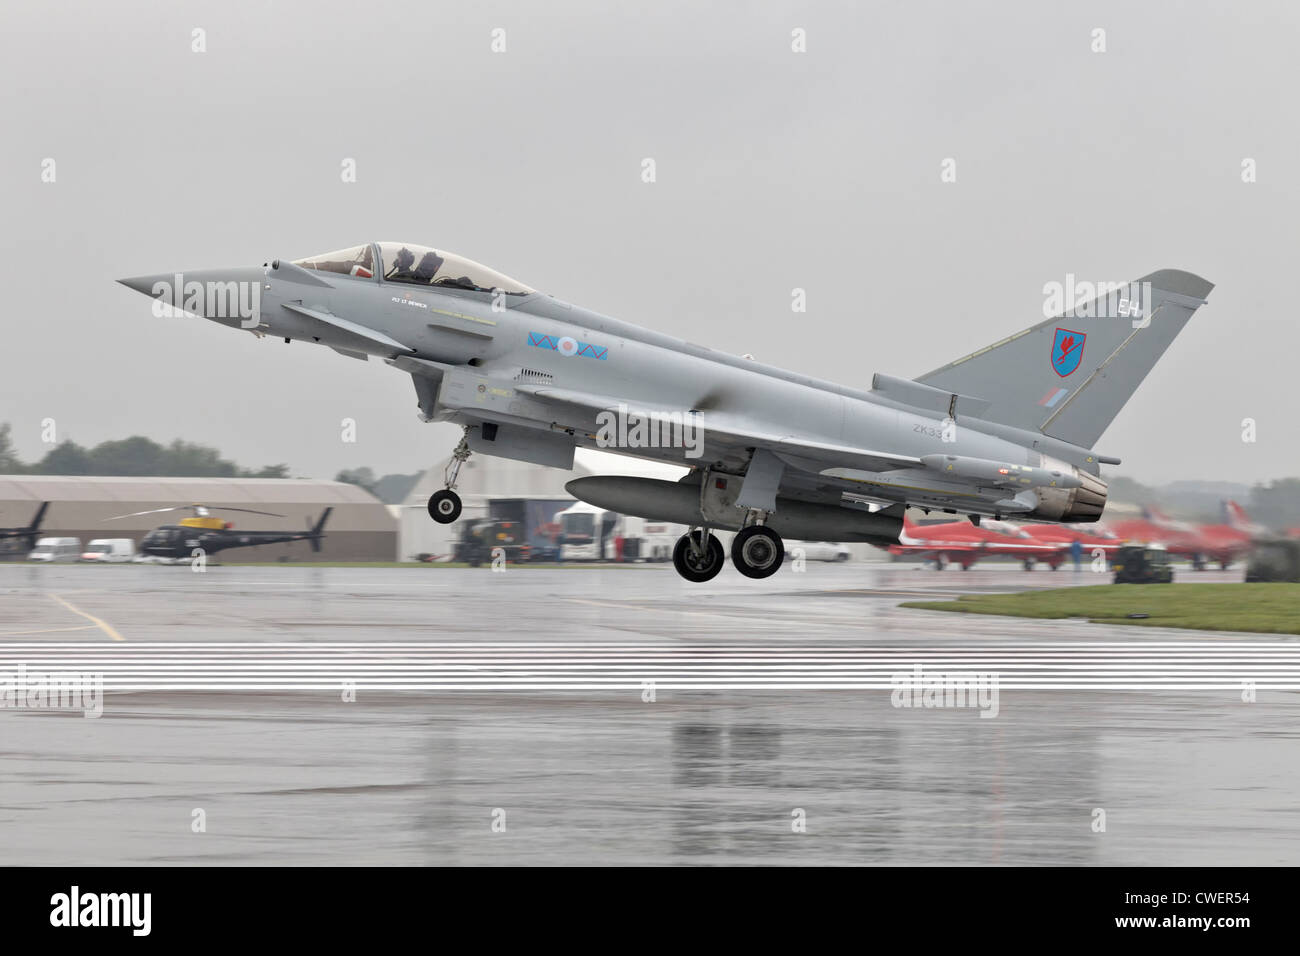 Bae systems Typhoon fighter of No 6 Squadron RAF landing in the rain at RIAT Fairford Stock Photo